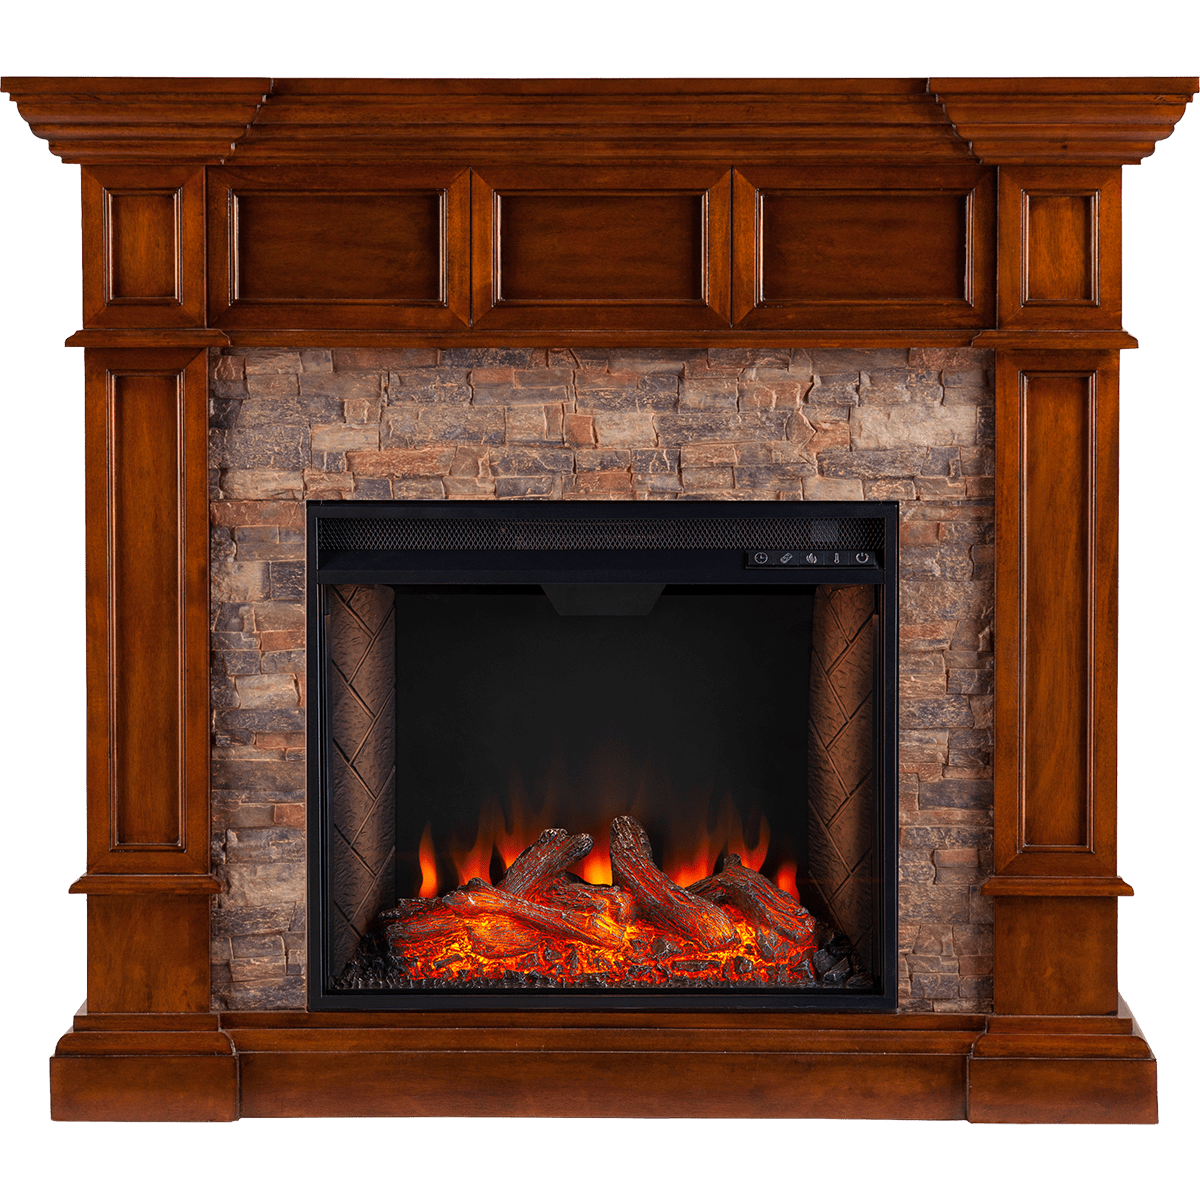 Dimplex Fireplace Tv Stand Unique southern Enterprises Merrimack Simulated Stone Convertible Electric Fireplace